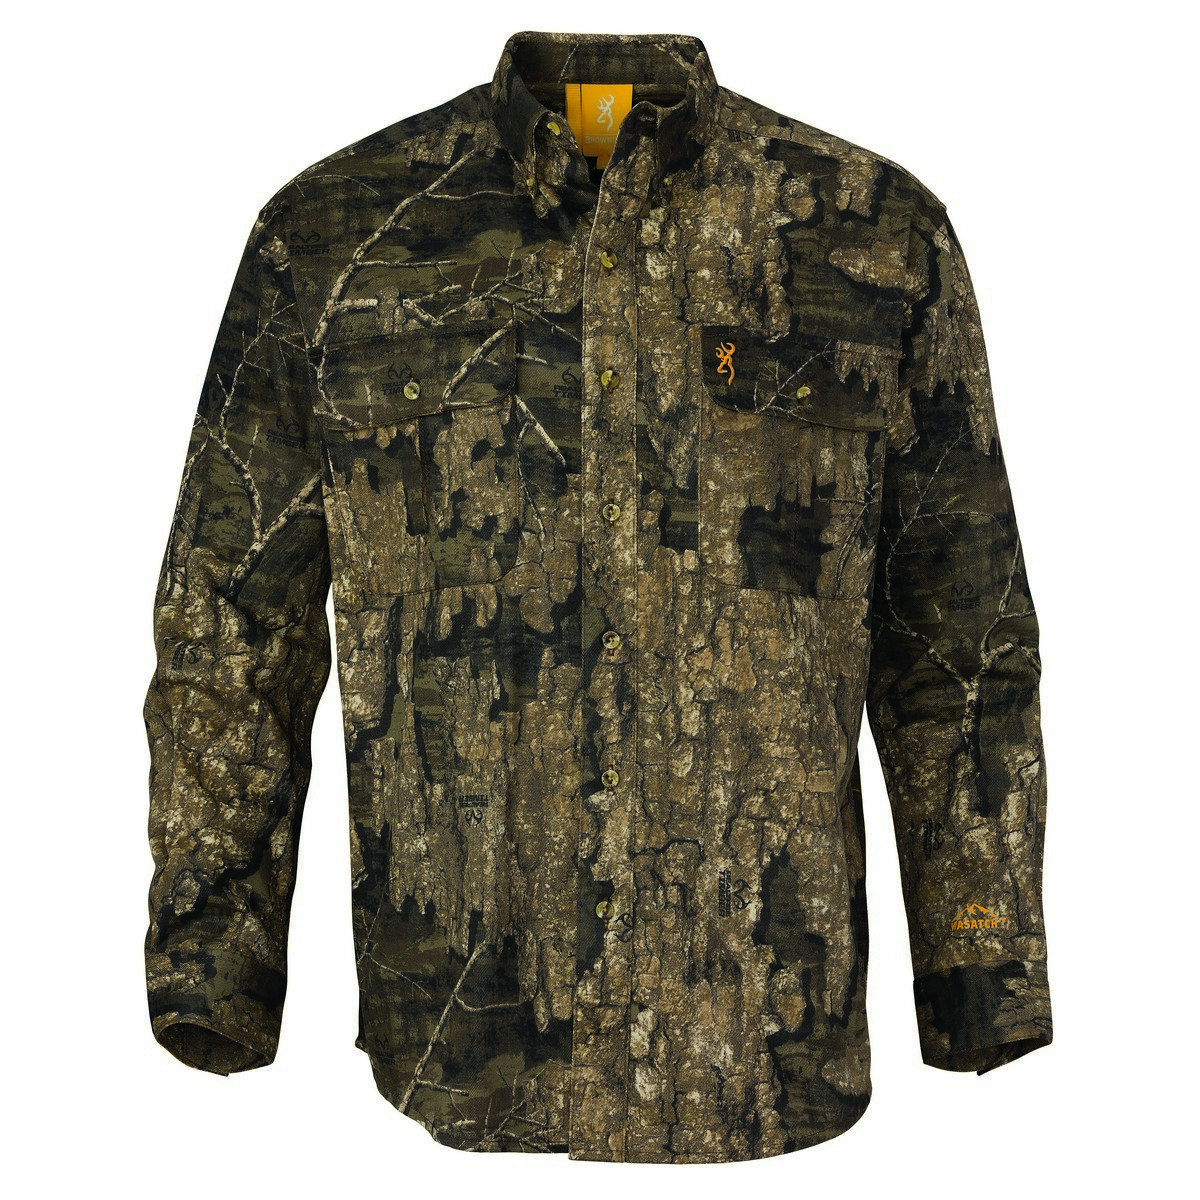 Choose Size & Sleeve Browning Wasatch Realtree Camo Hunting L/S & S/S Shirt 